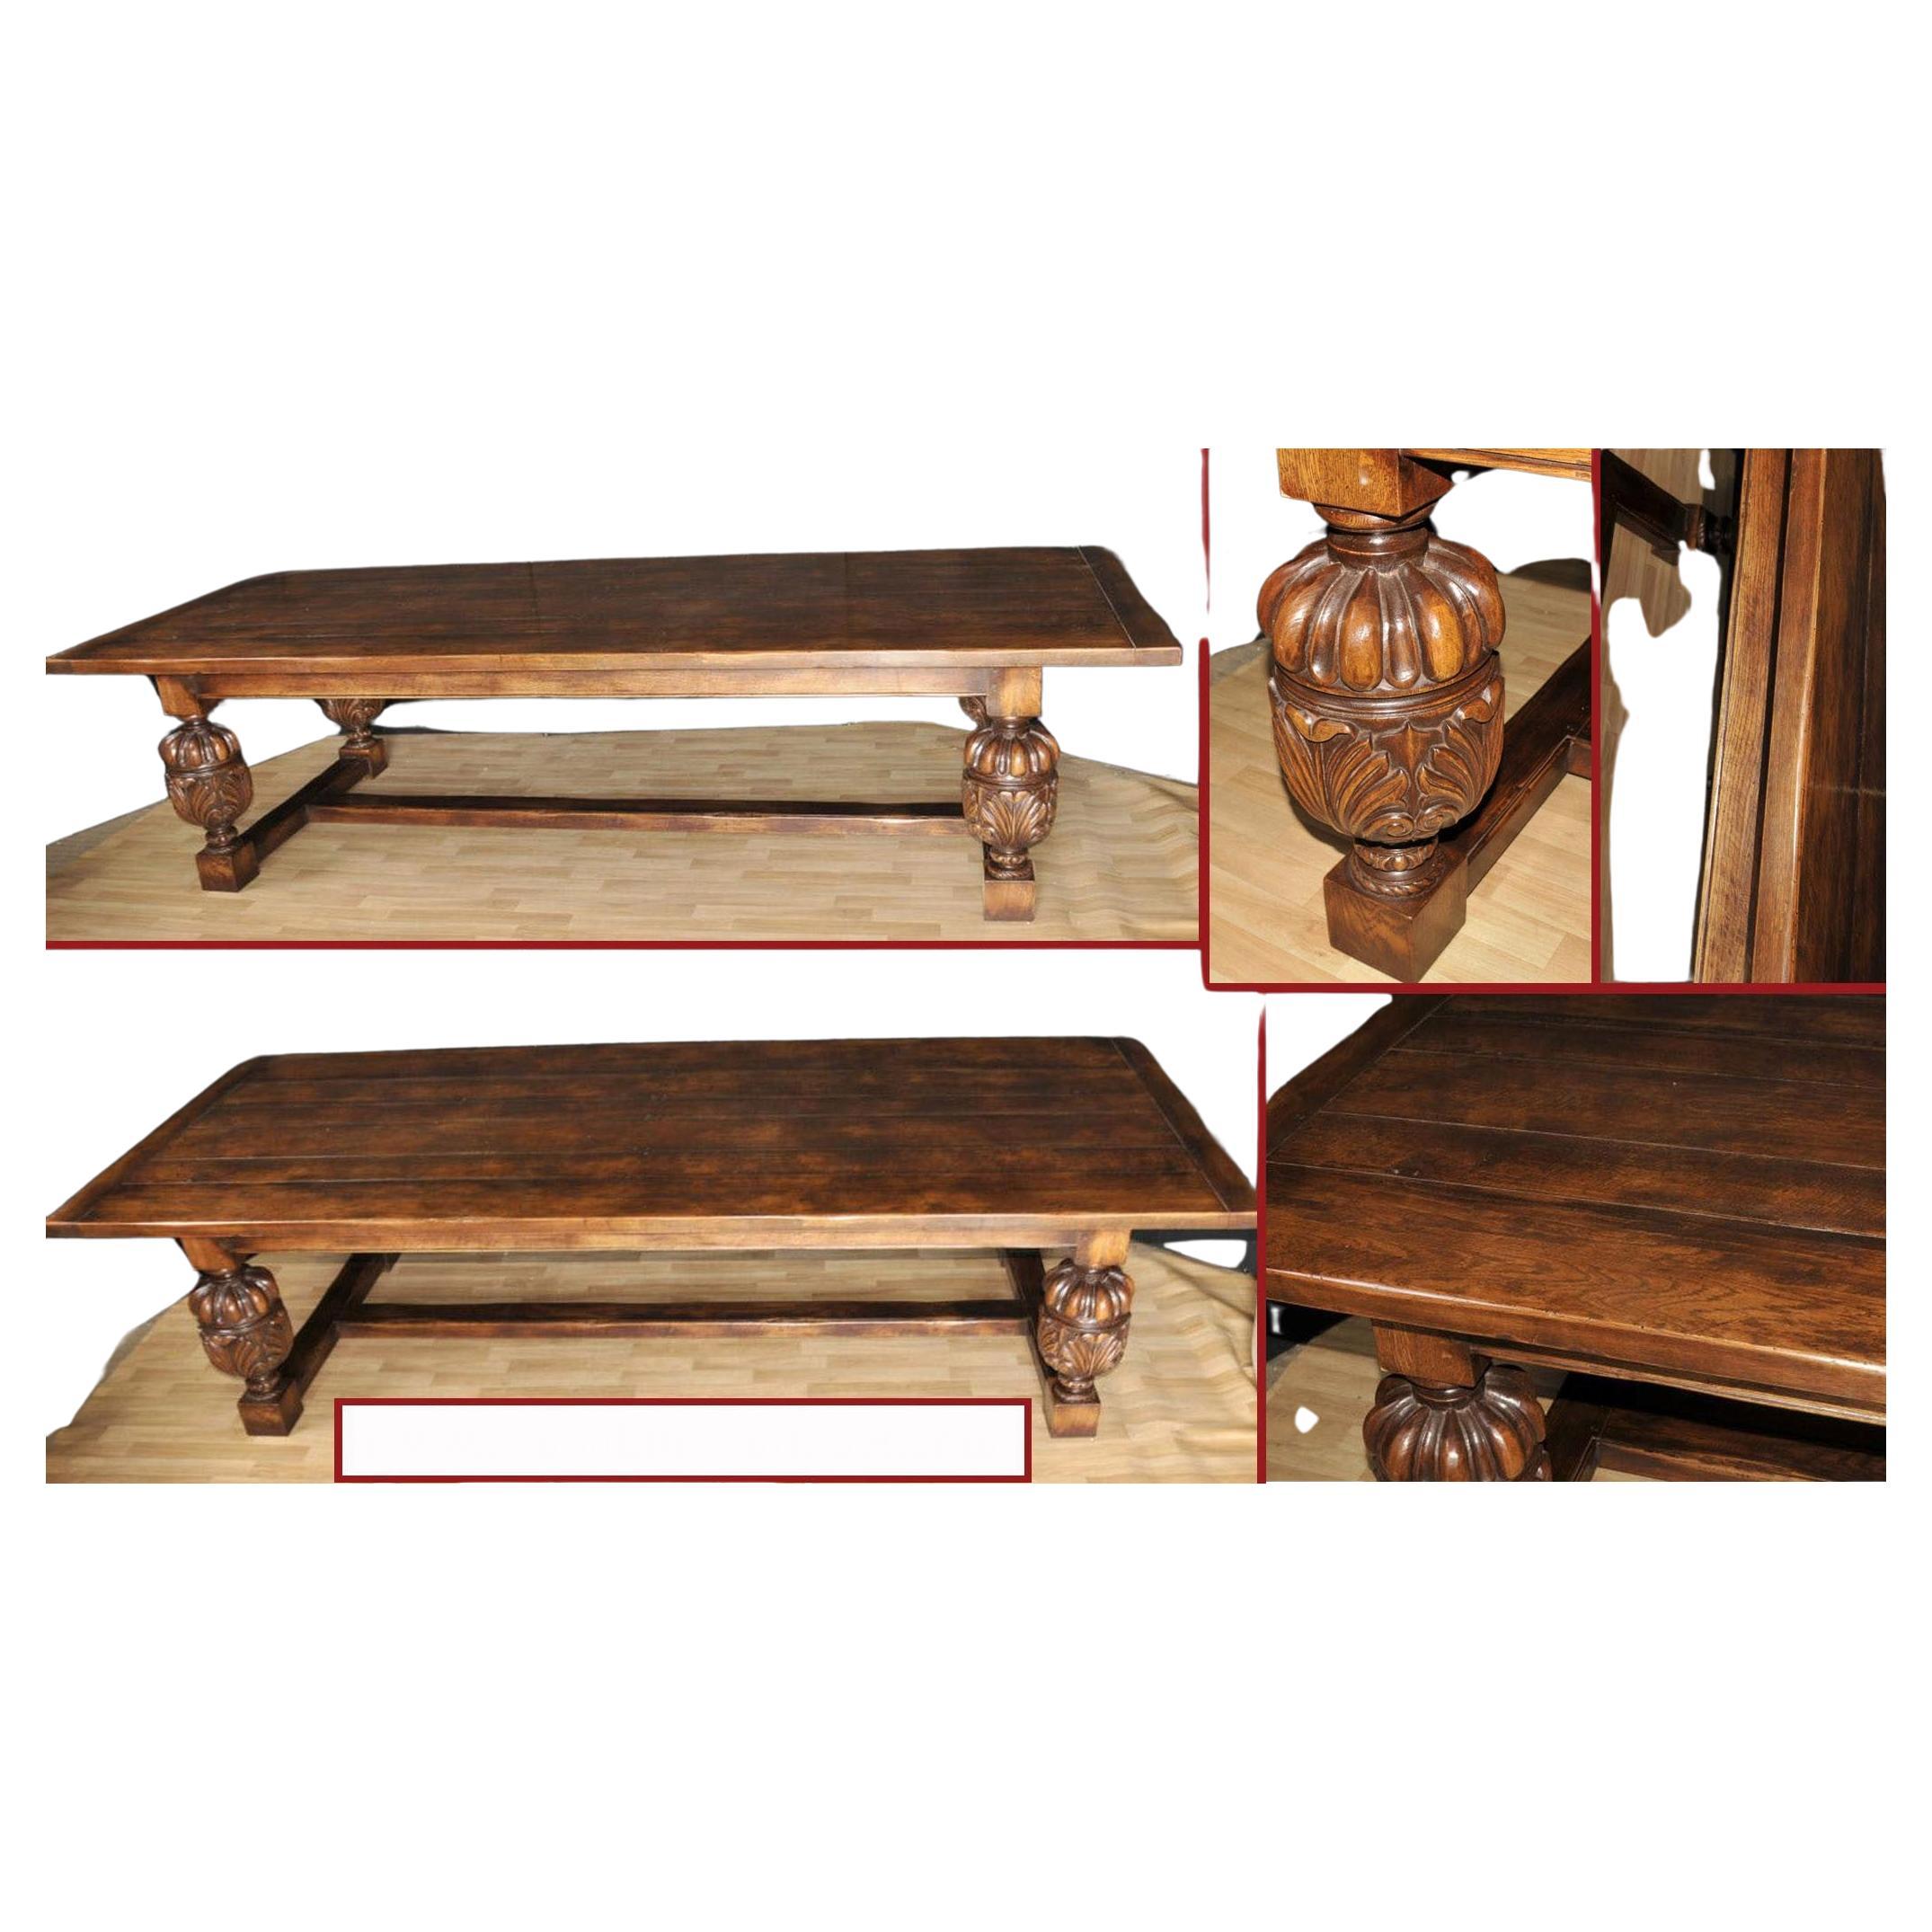 Large Refectory Table - French Farmhouse Oak Kitchen Dining Tables For Sale